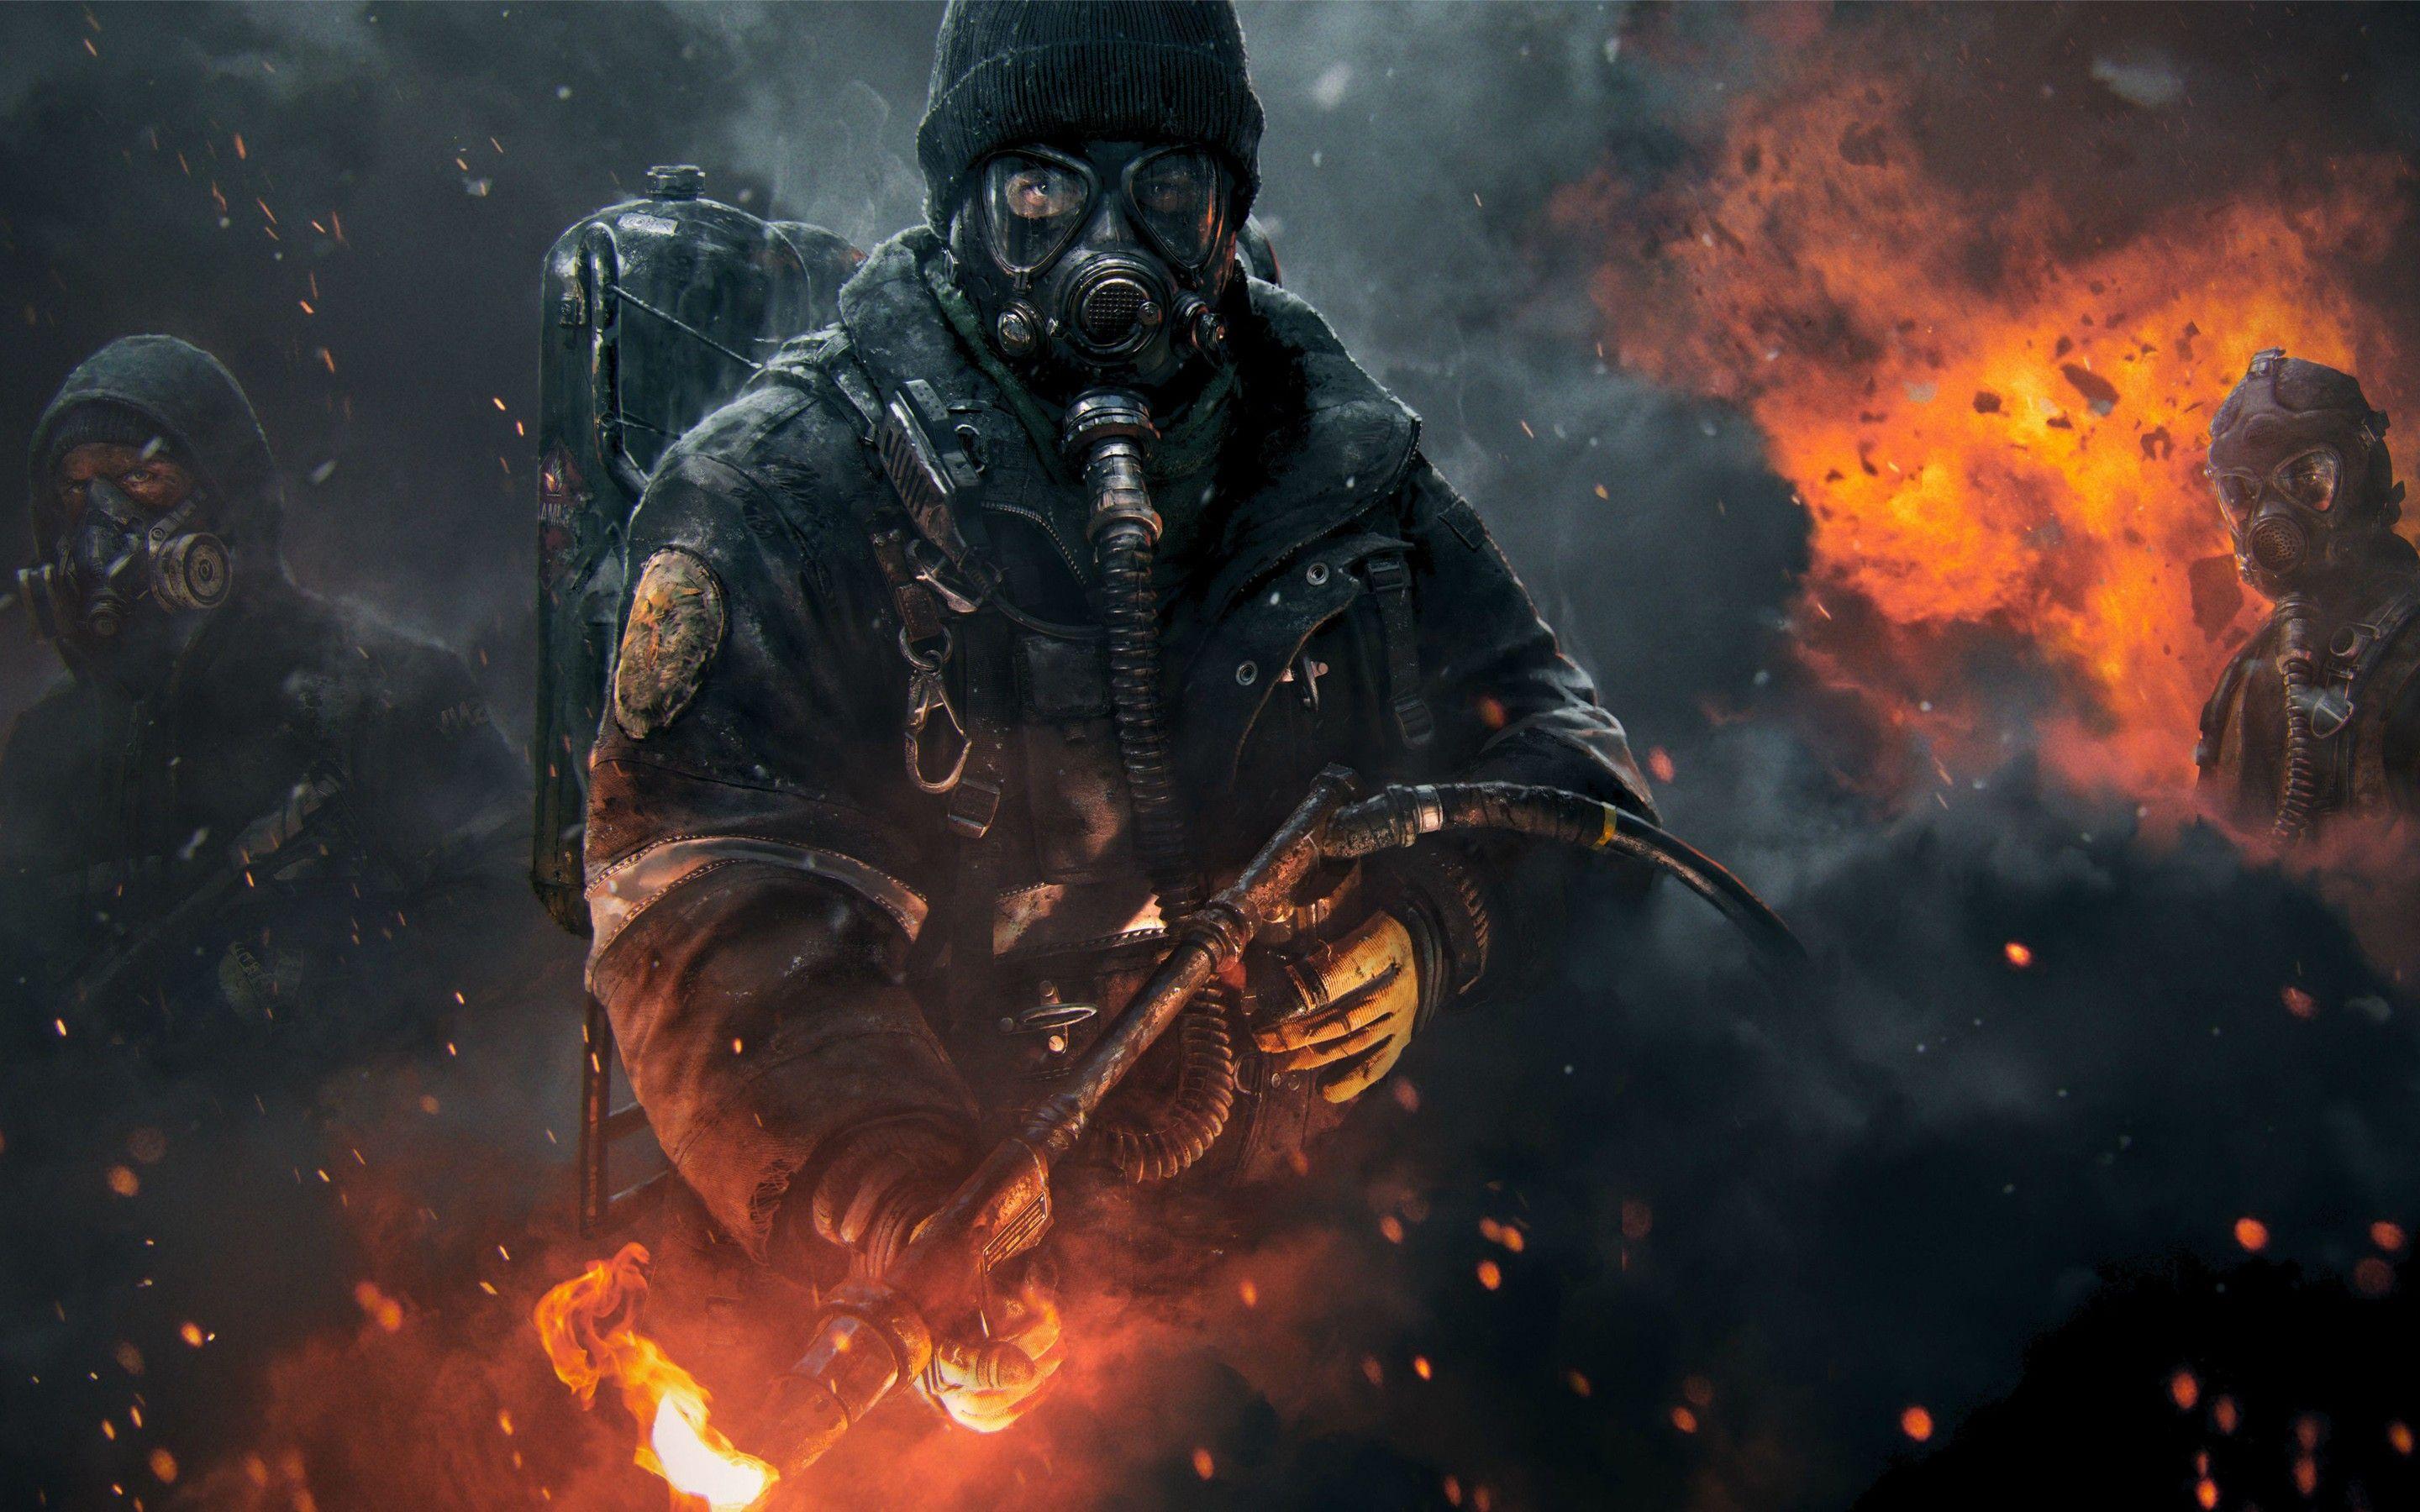 574236 1920x1080 tom clancys the division video games wallpaper JPG 542 kB   Rare Gallery HD Wallpapers